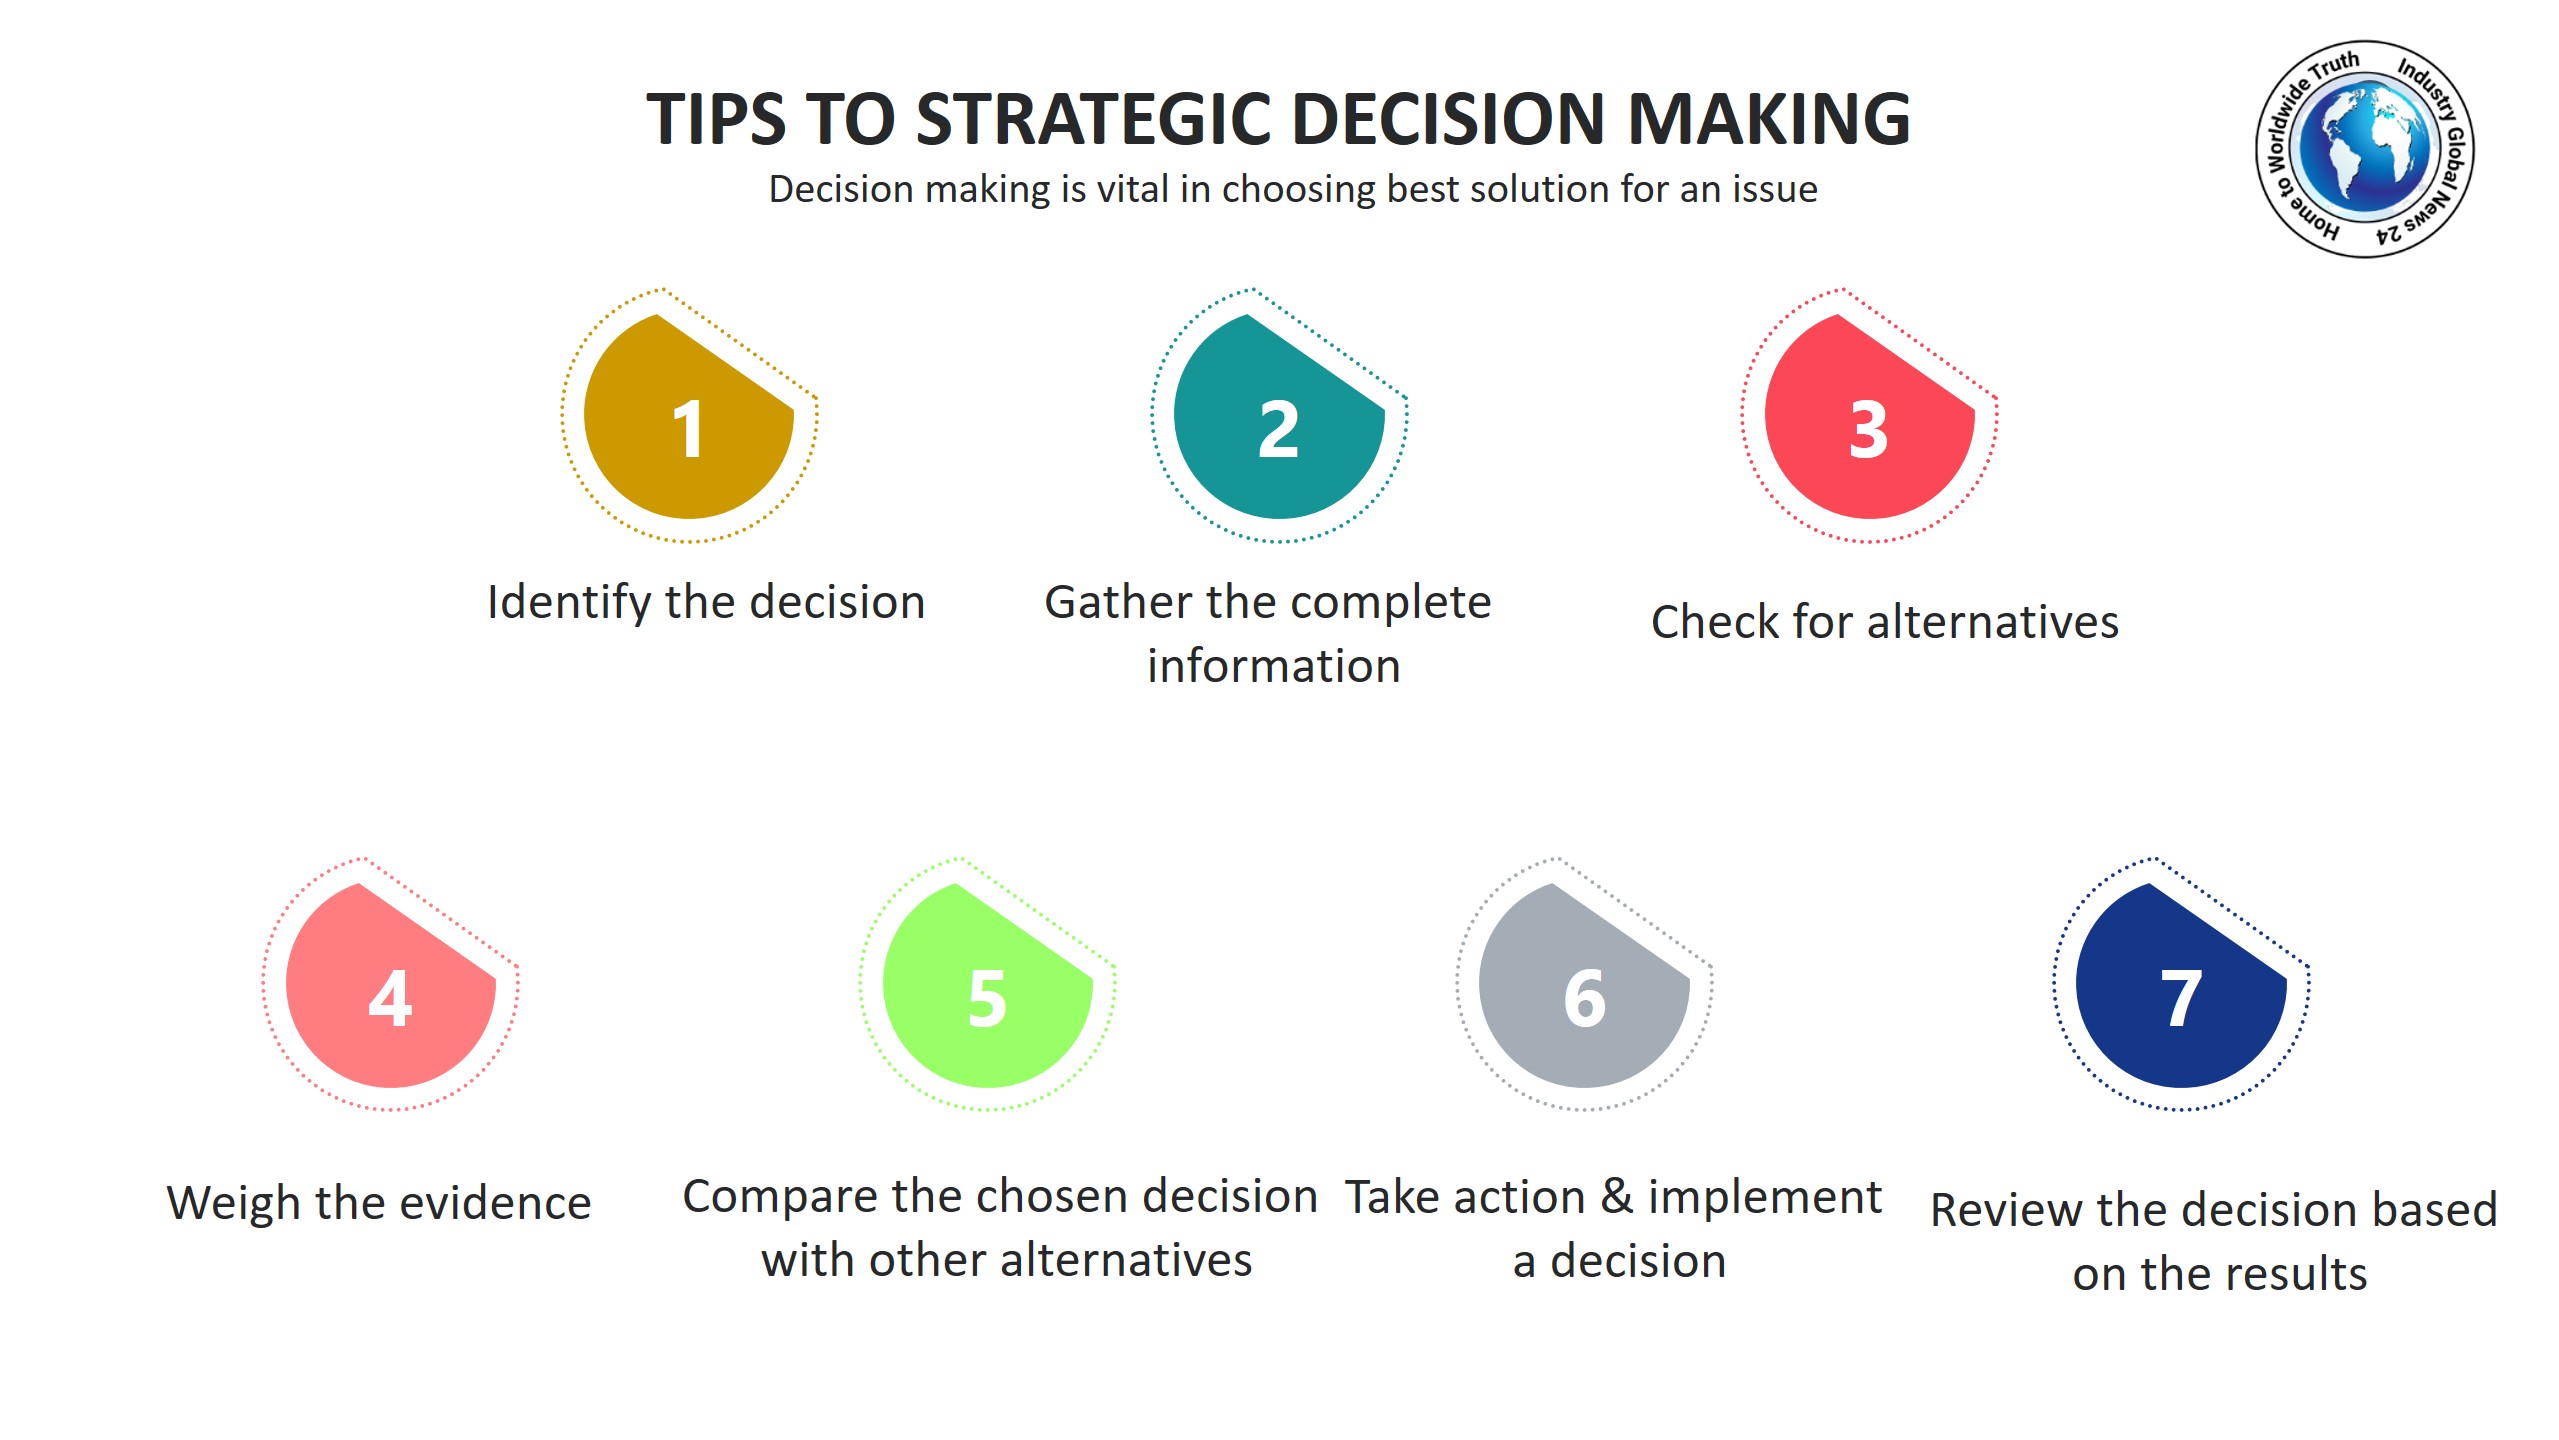 Tips to strategic decision making